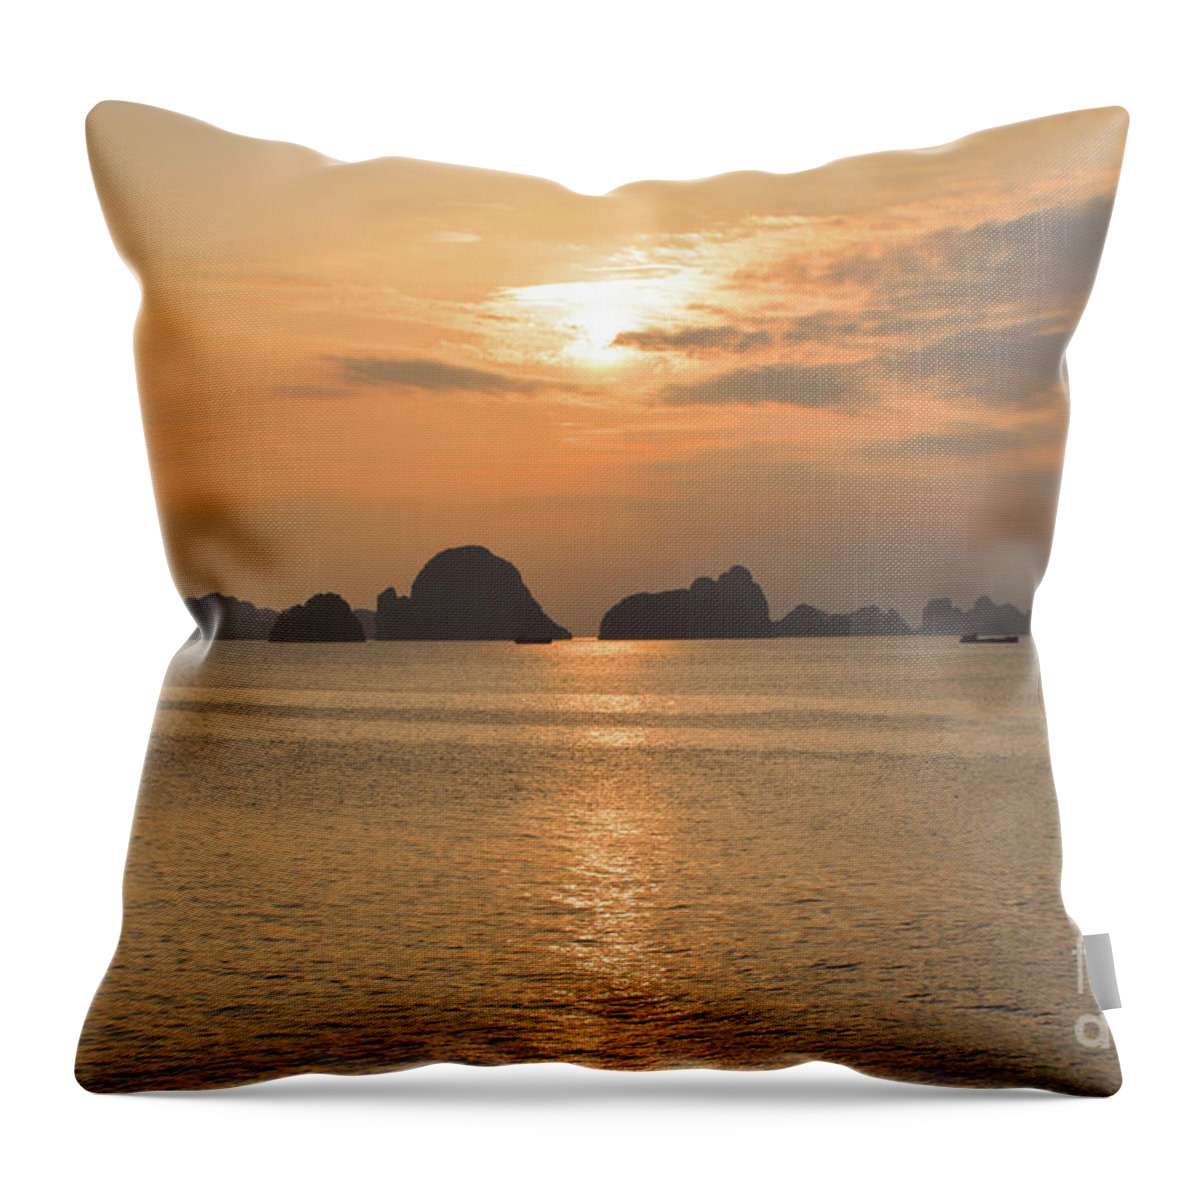 The Edge Of The World Throw Pillow featuring the photograph The Edge of the World by Josephine Cohn